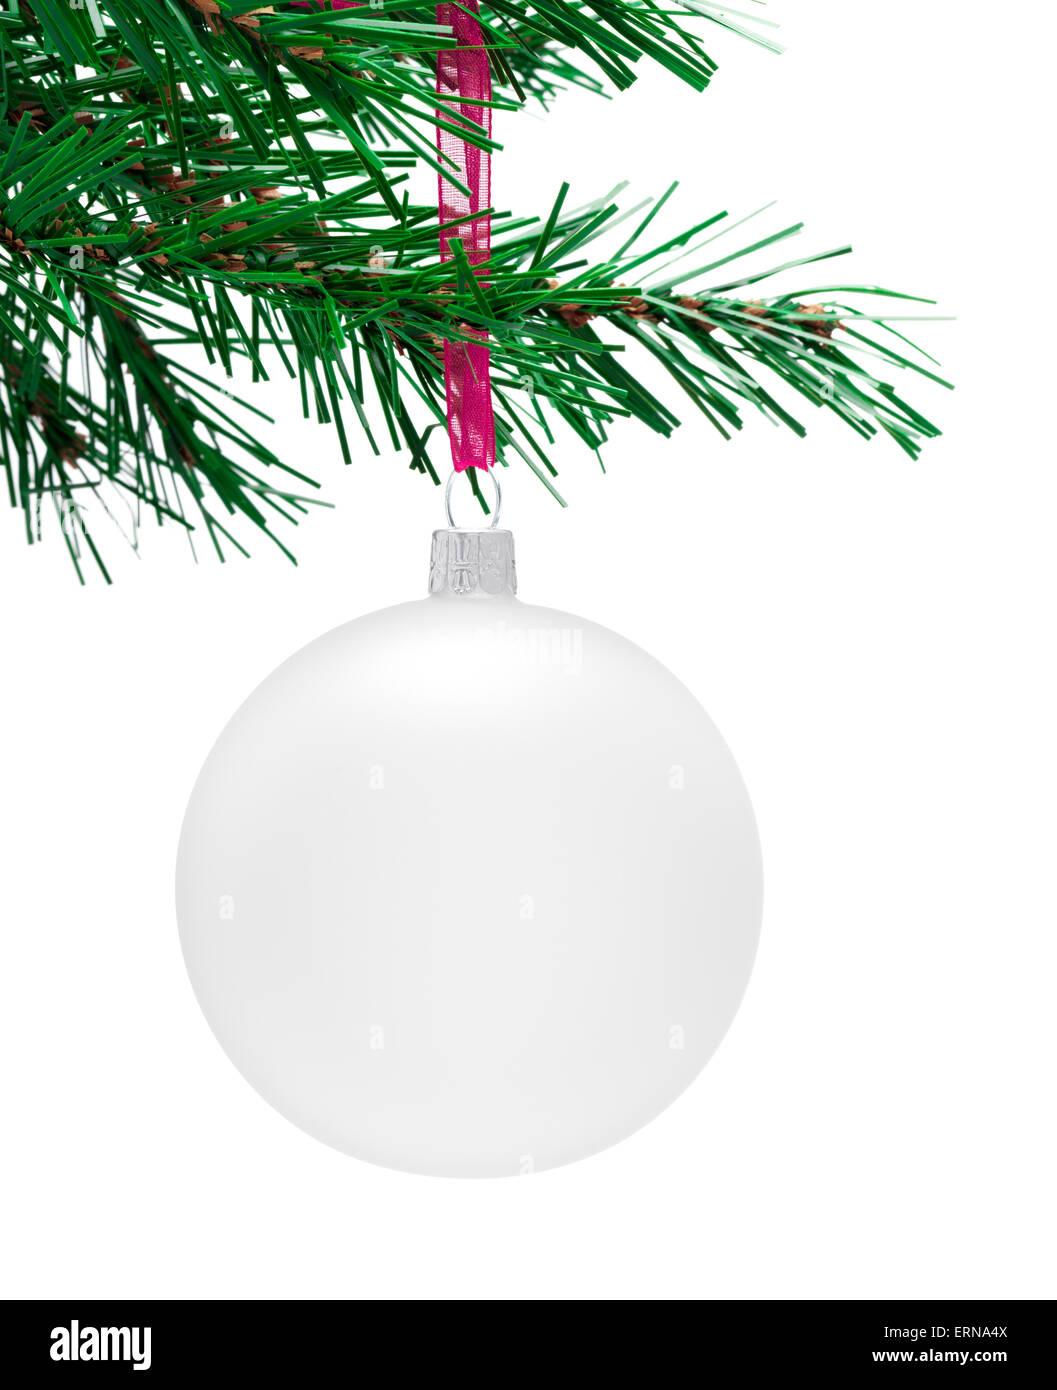 Christmas tree with a Bauble Stock Photo